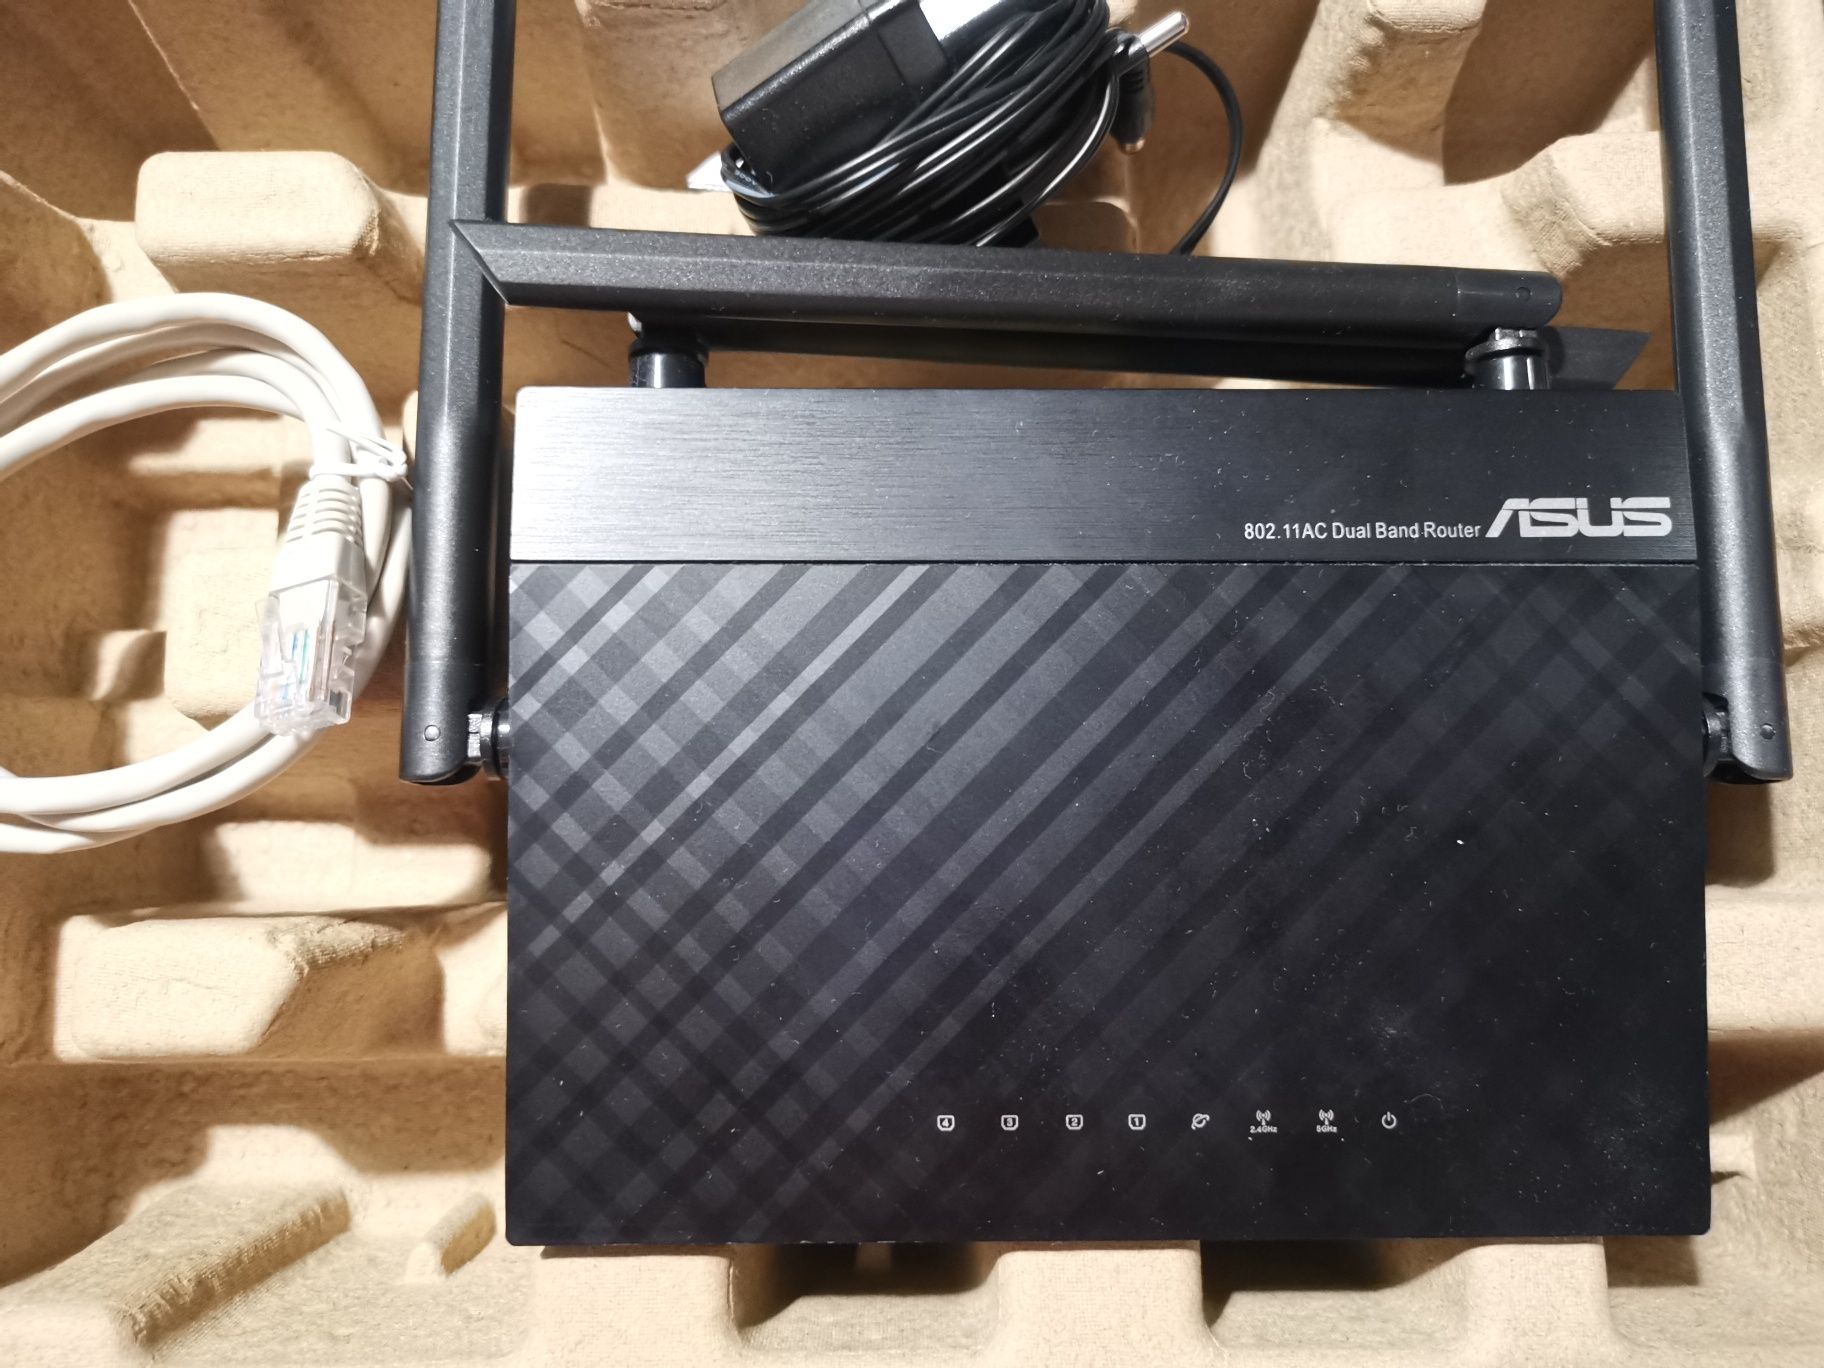 Router ASUS RT-AC750L